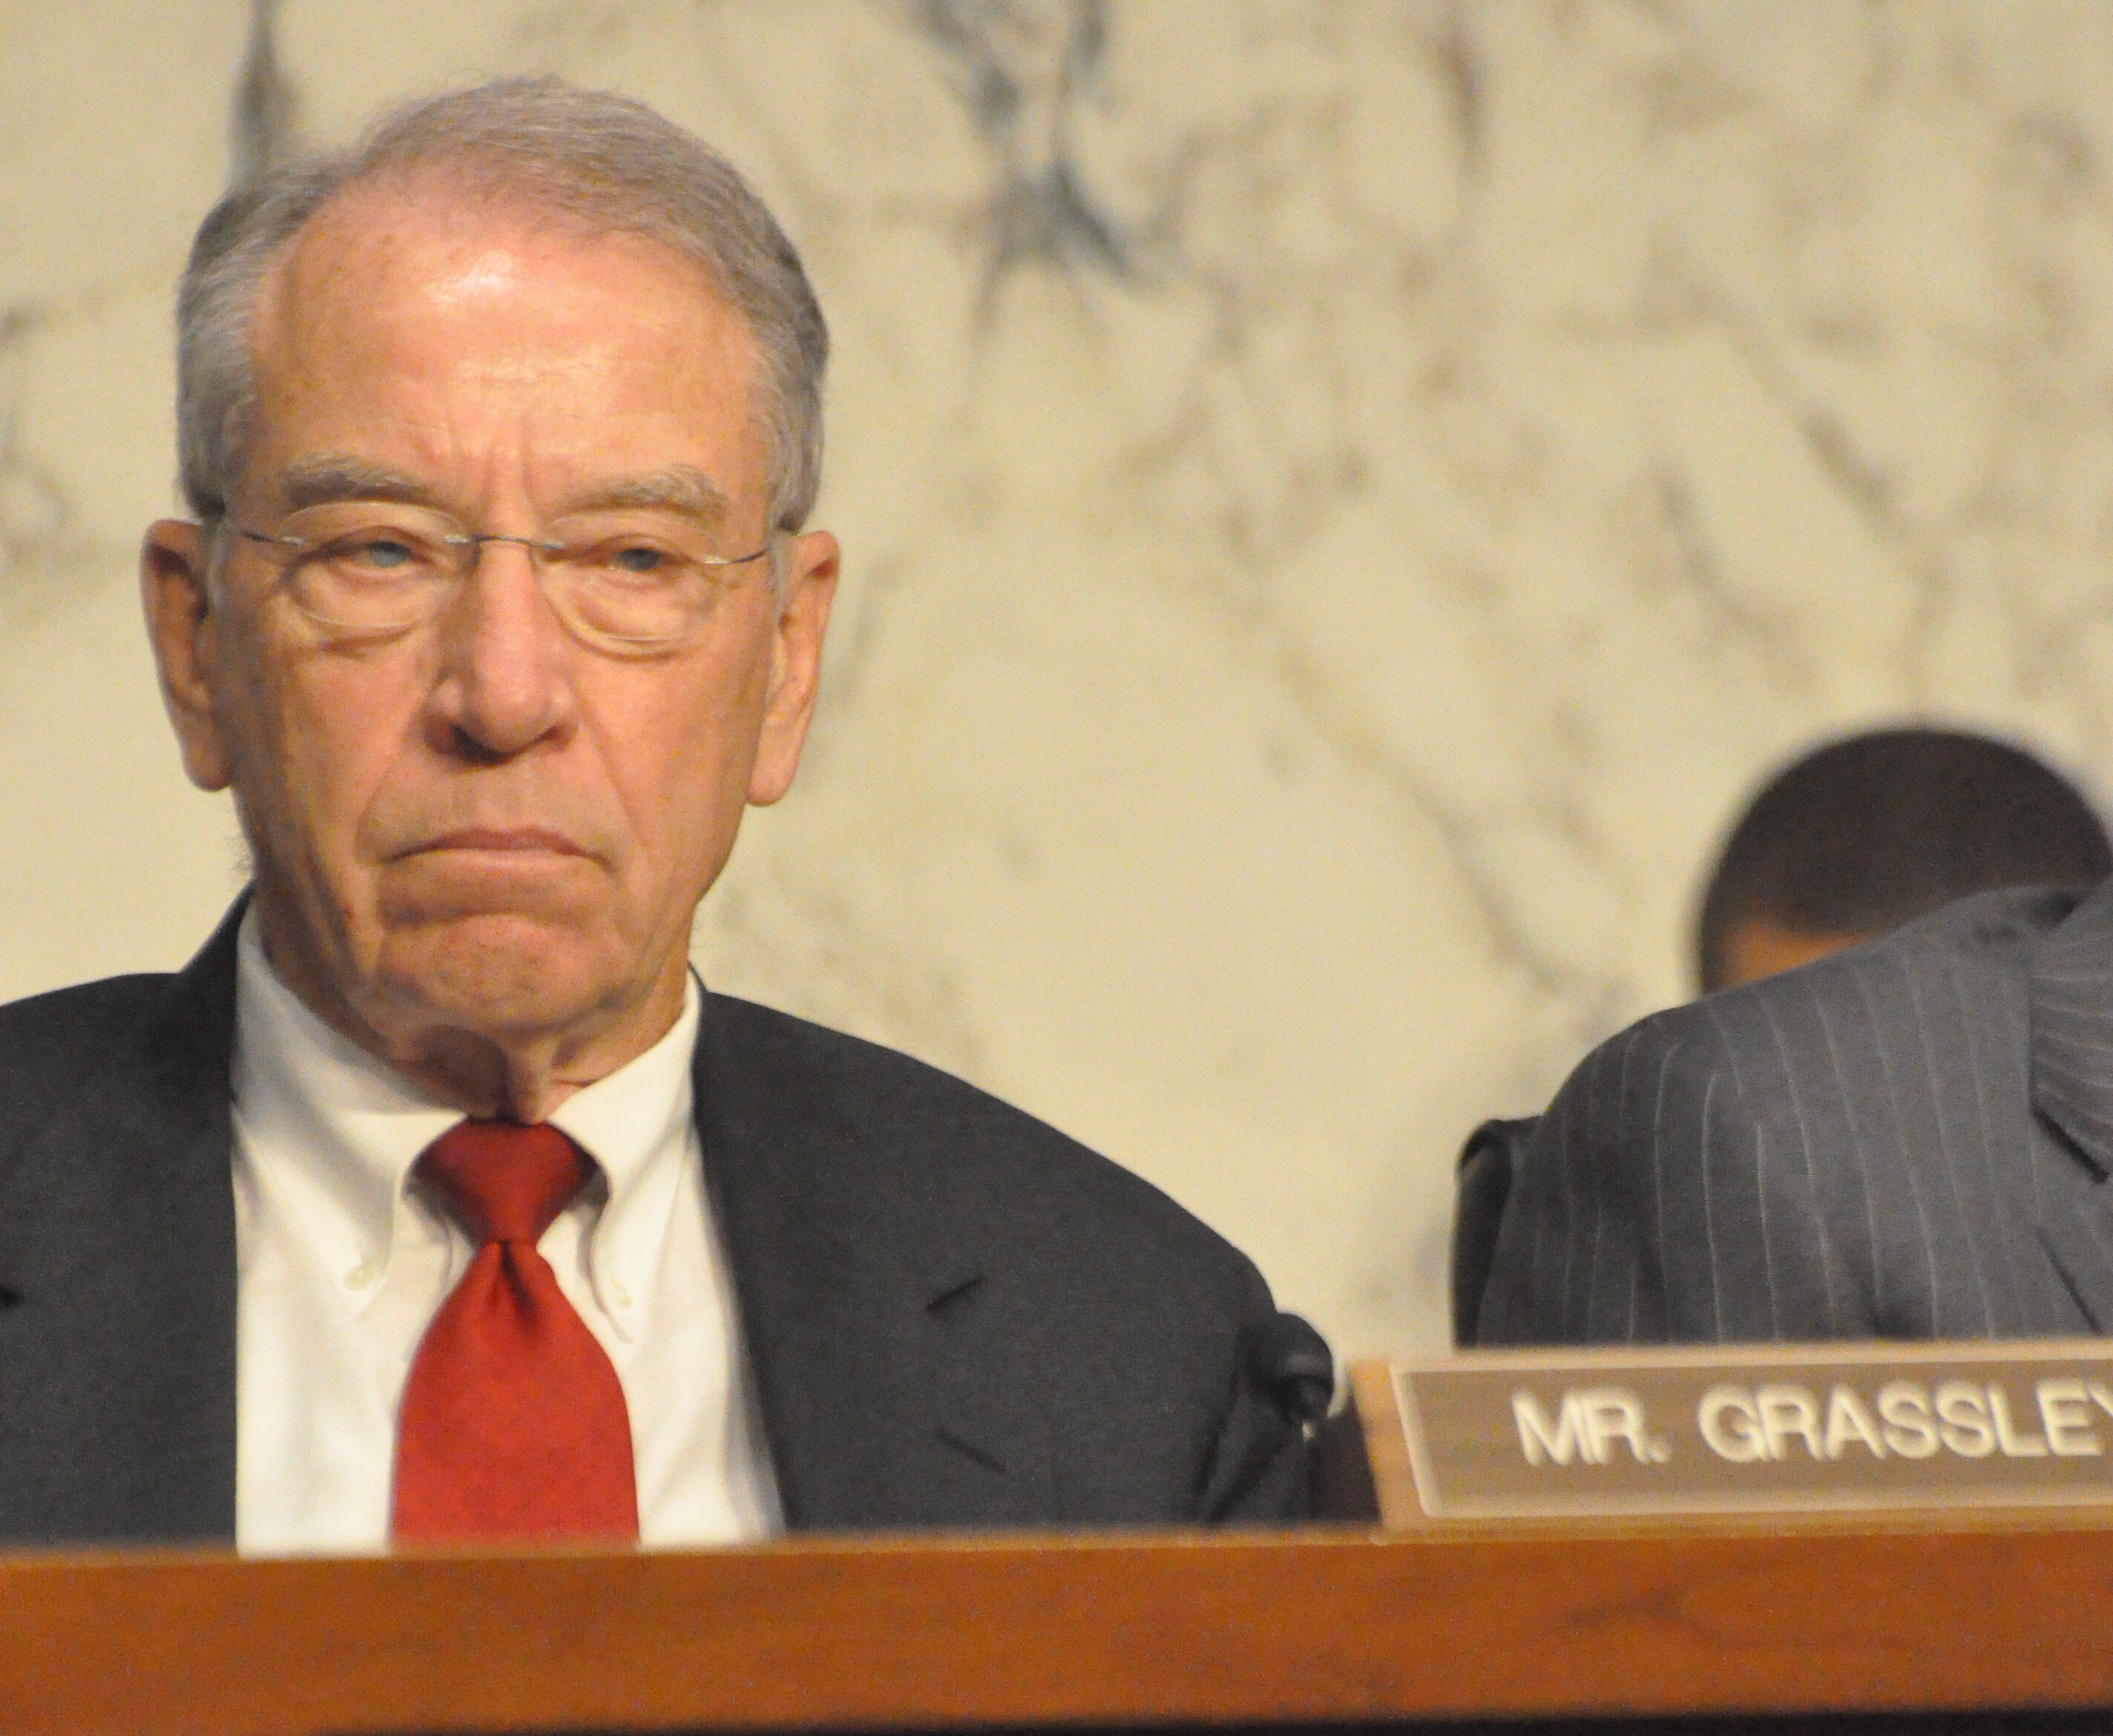 Medible review sessions vs grassley sentencing reform sparks fight on the conservative right